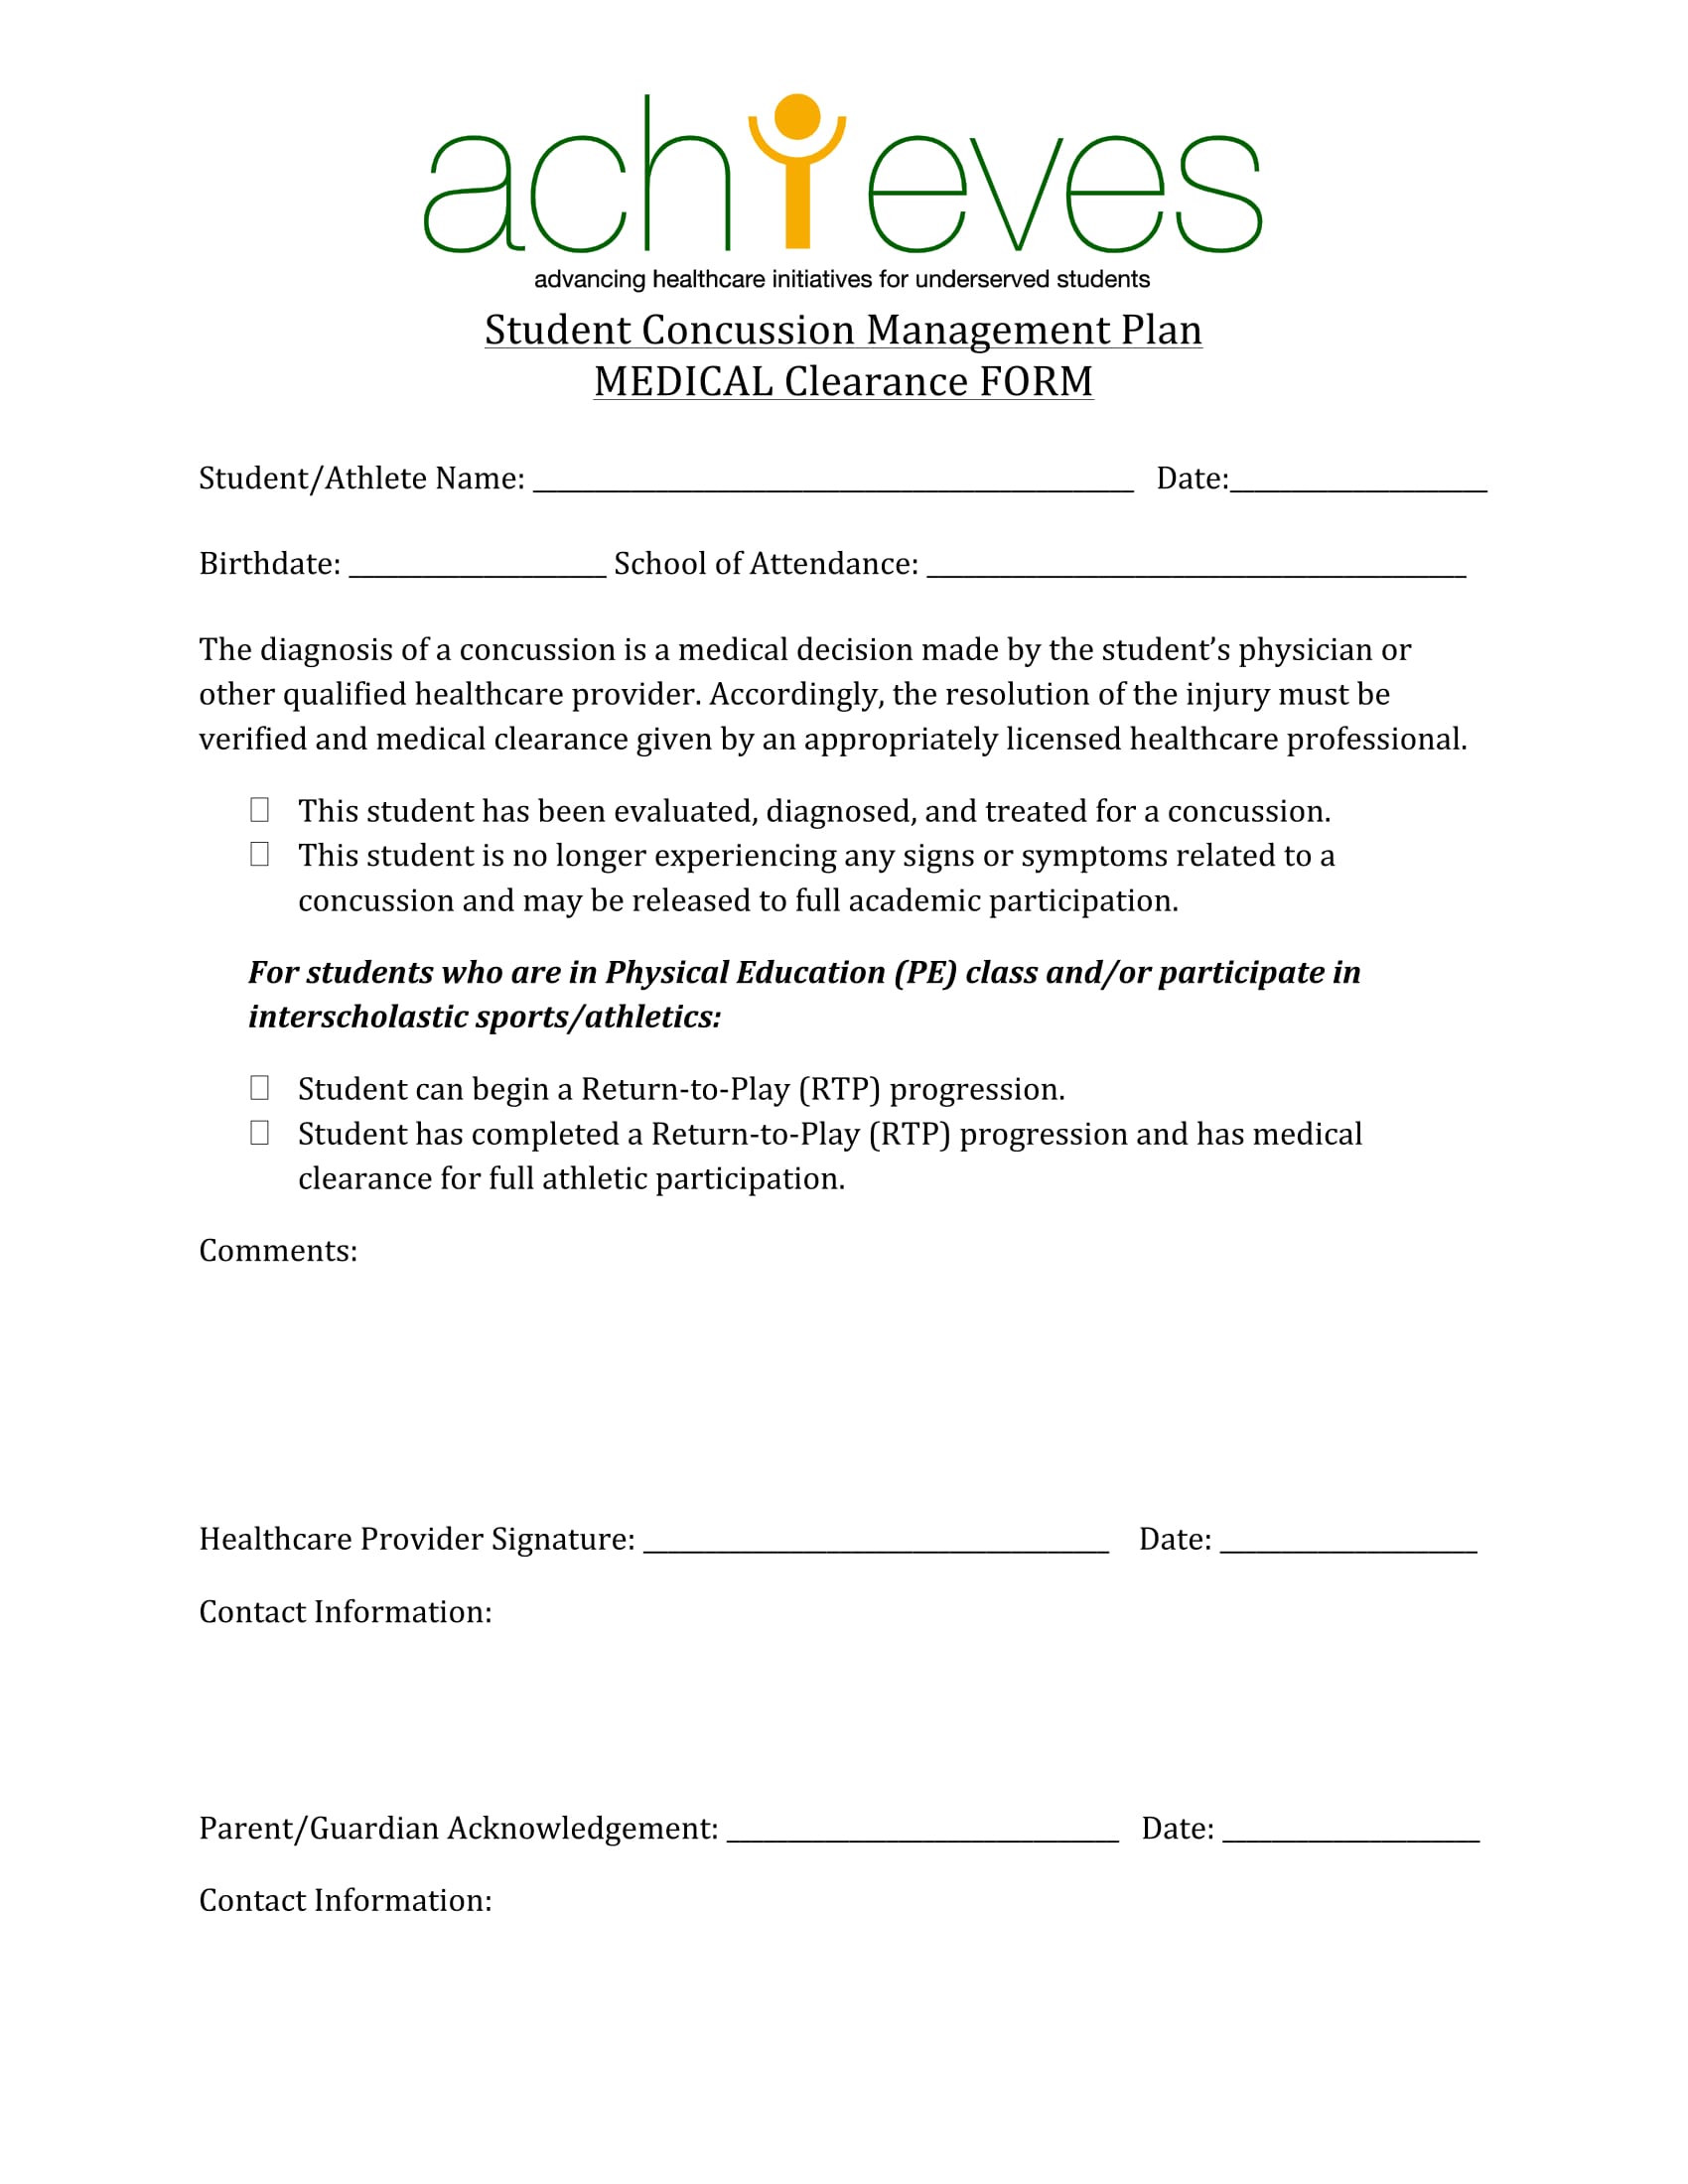 student concussion medical clearance form 1